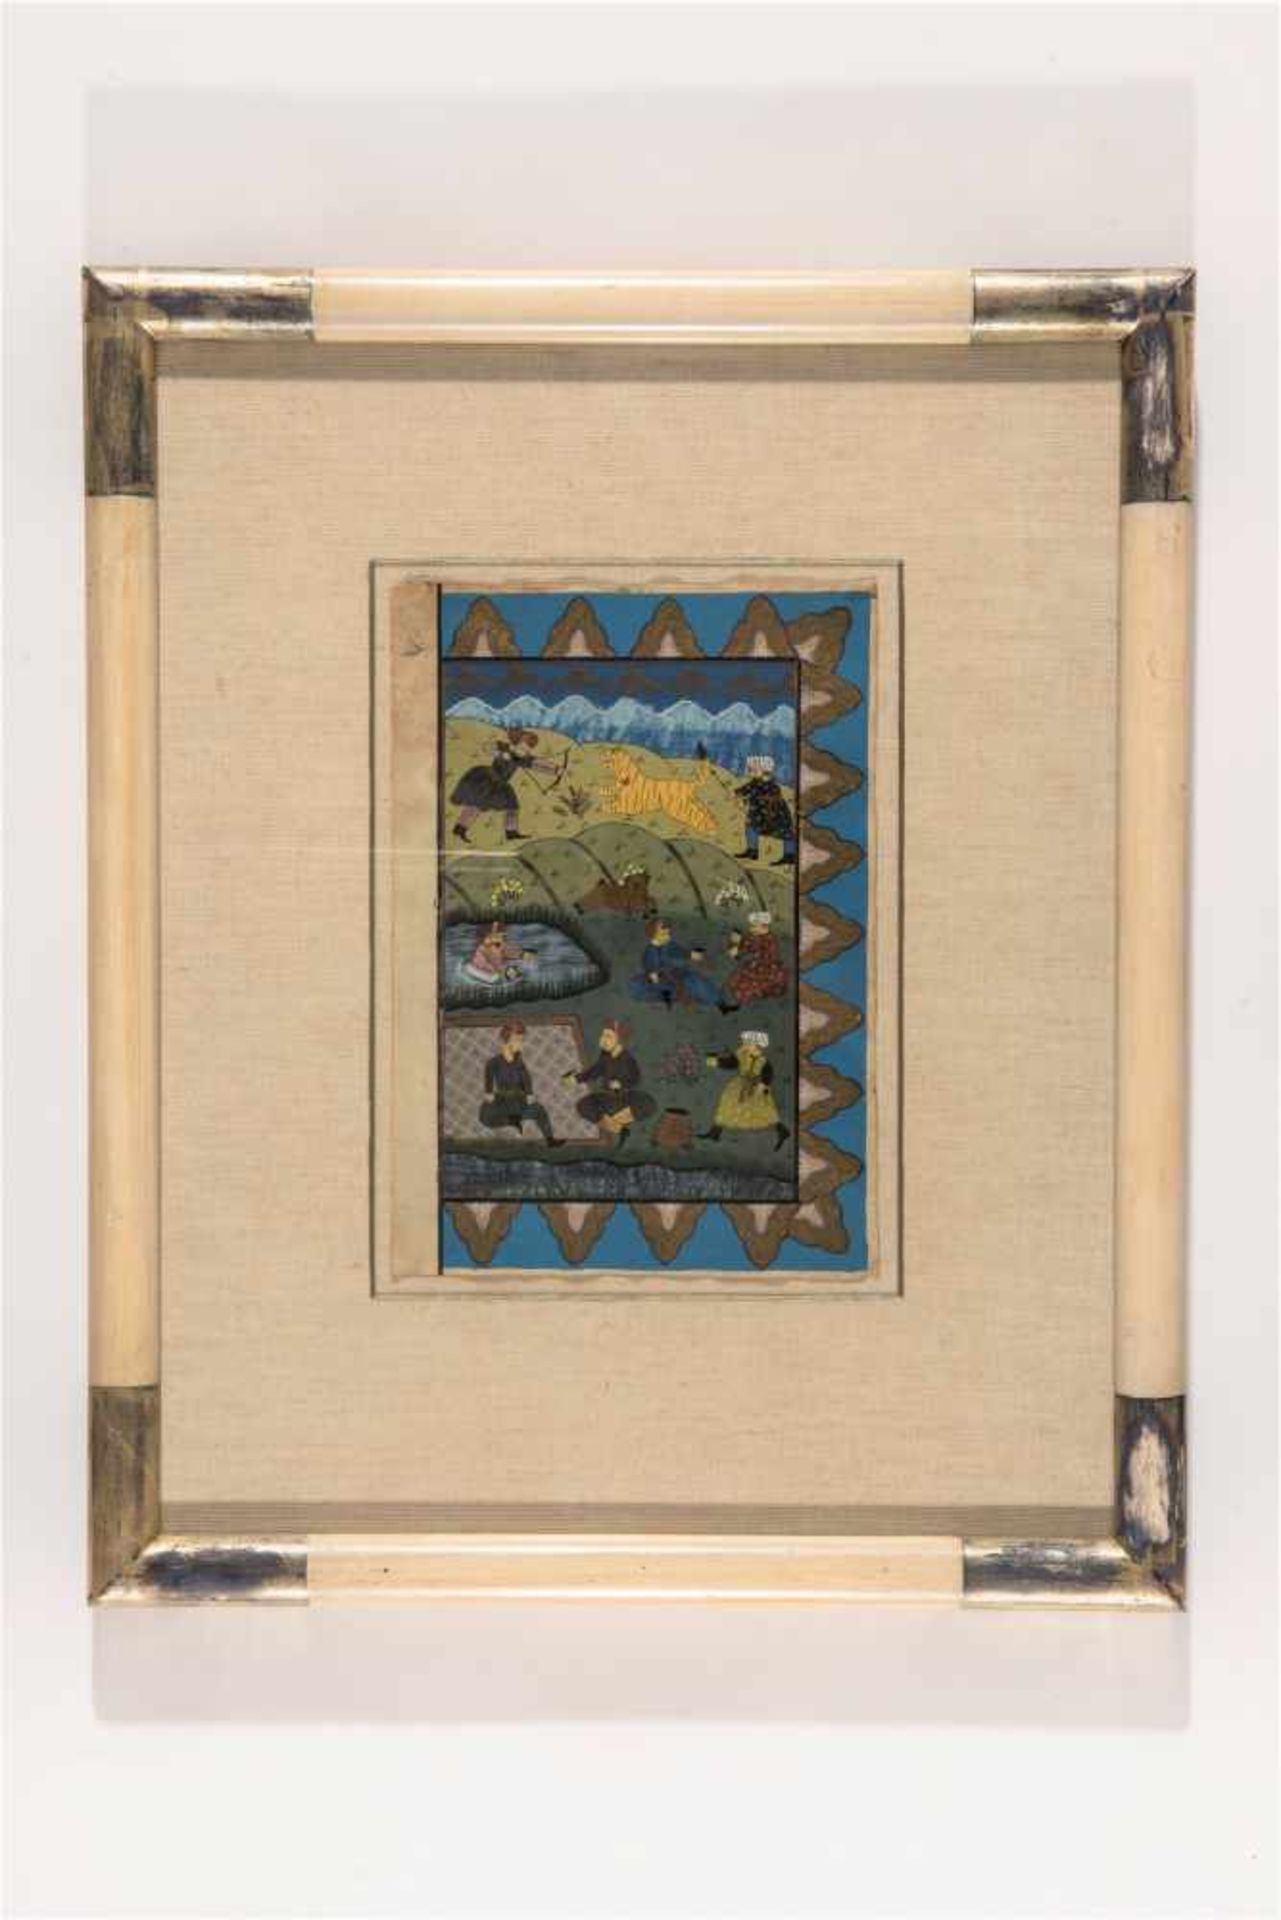 AN INDO-PERSIAN MINIATURE PAINTING - 19th CENTURYMiniature painting with colors and gold on - Image 2 of 2